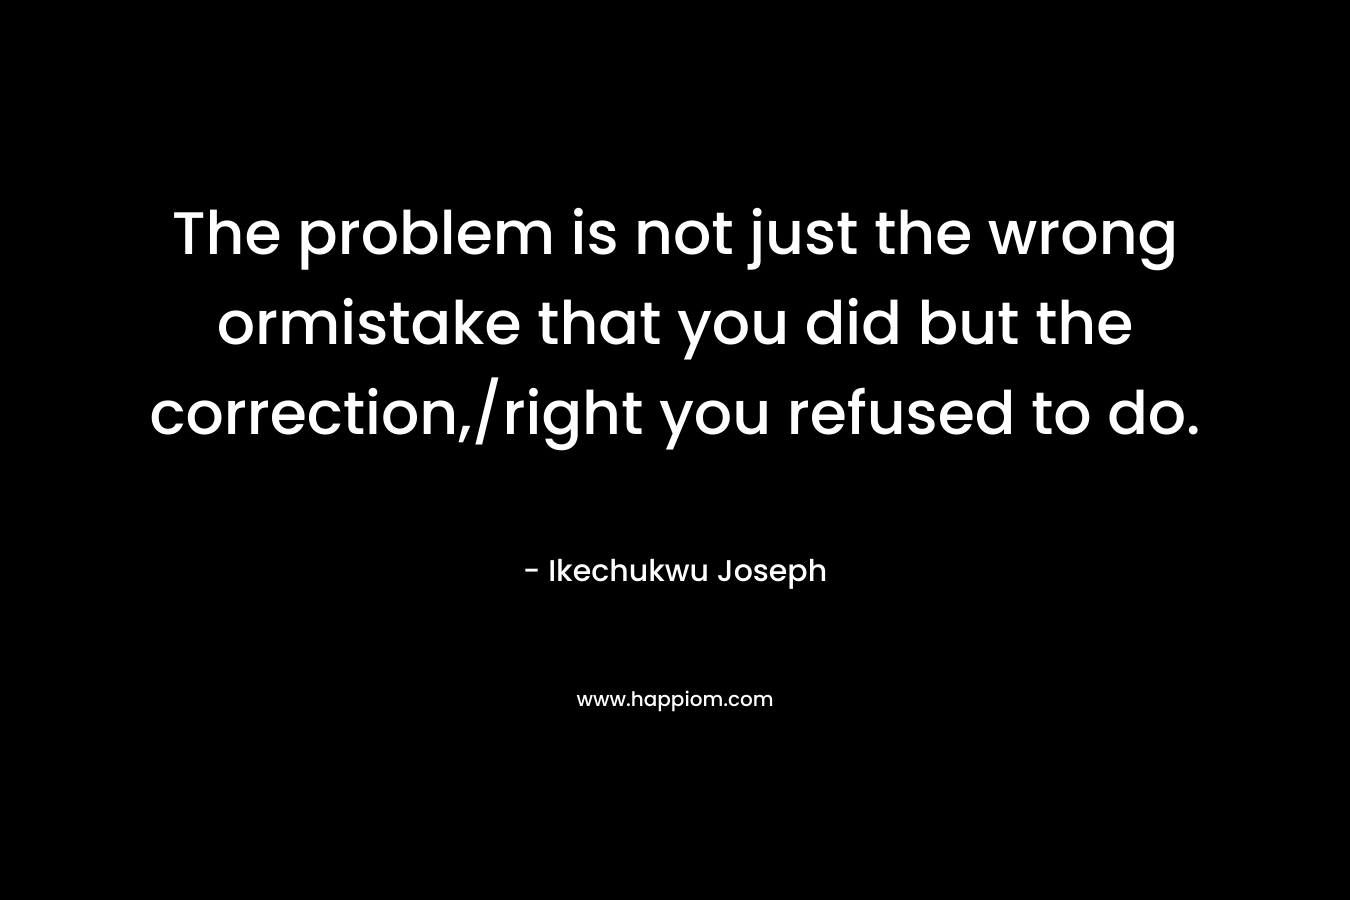 The problem is not just the wrong ormistake that you did but the correction,/right you refused to do.